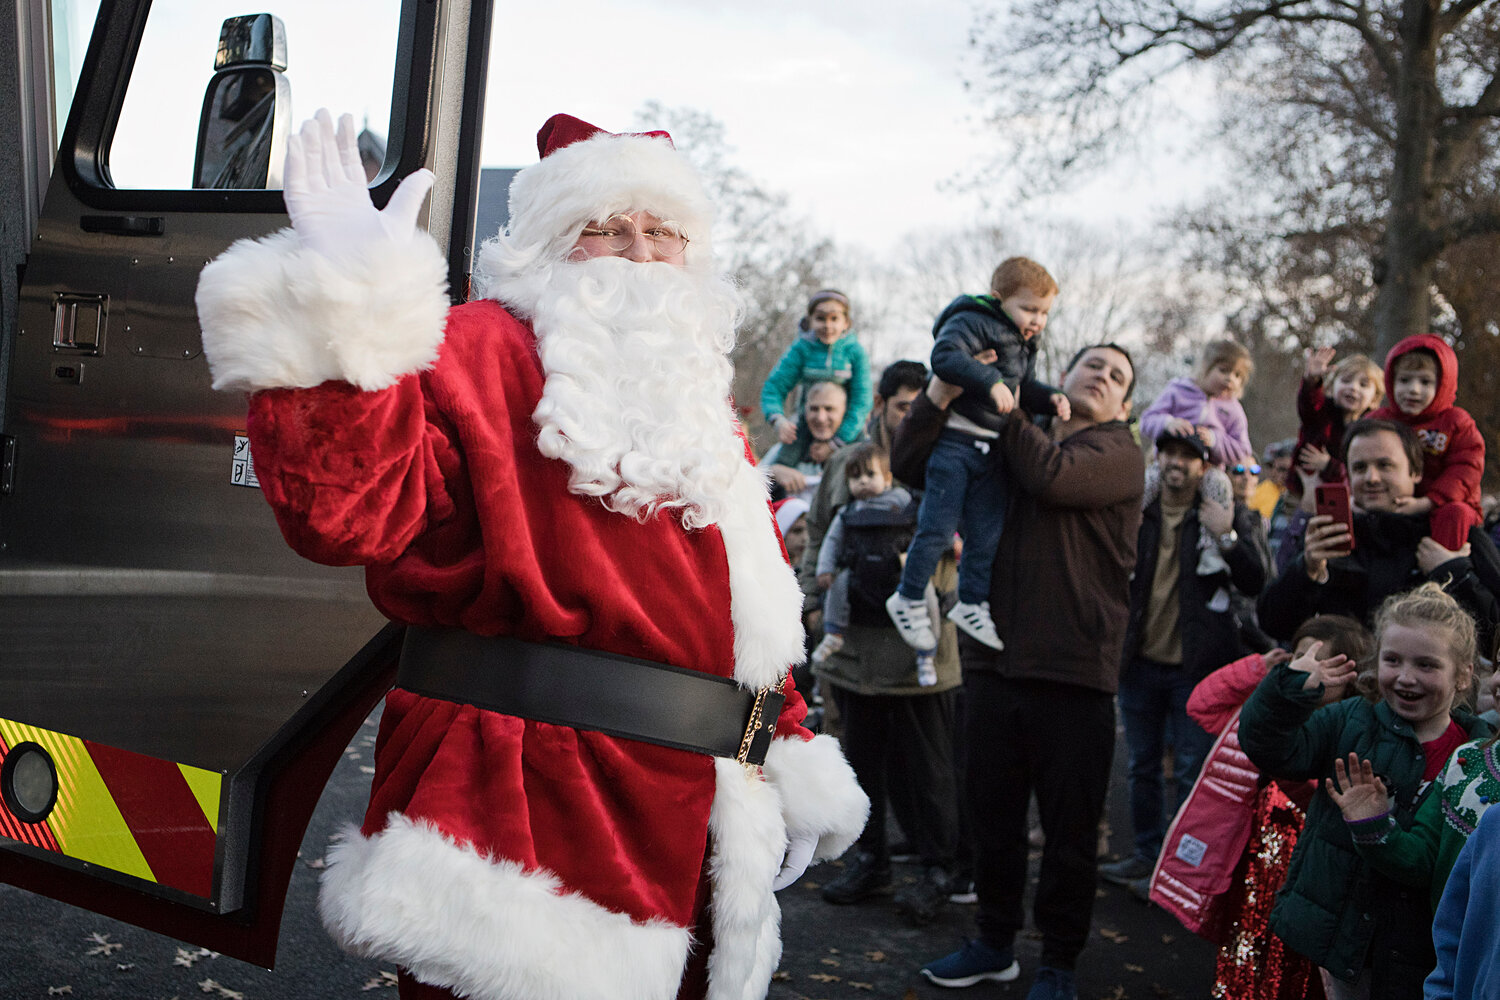 Santa waves to the crowd as he climbs out of a fire truck, at the tree-lighting event in Barrington on Saturday, Dec. 2.